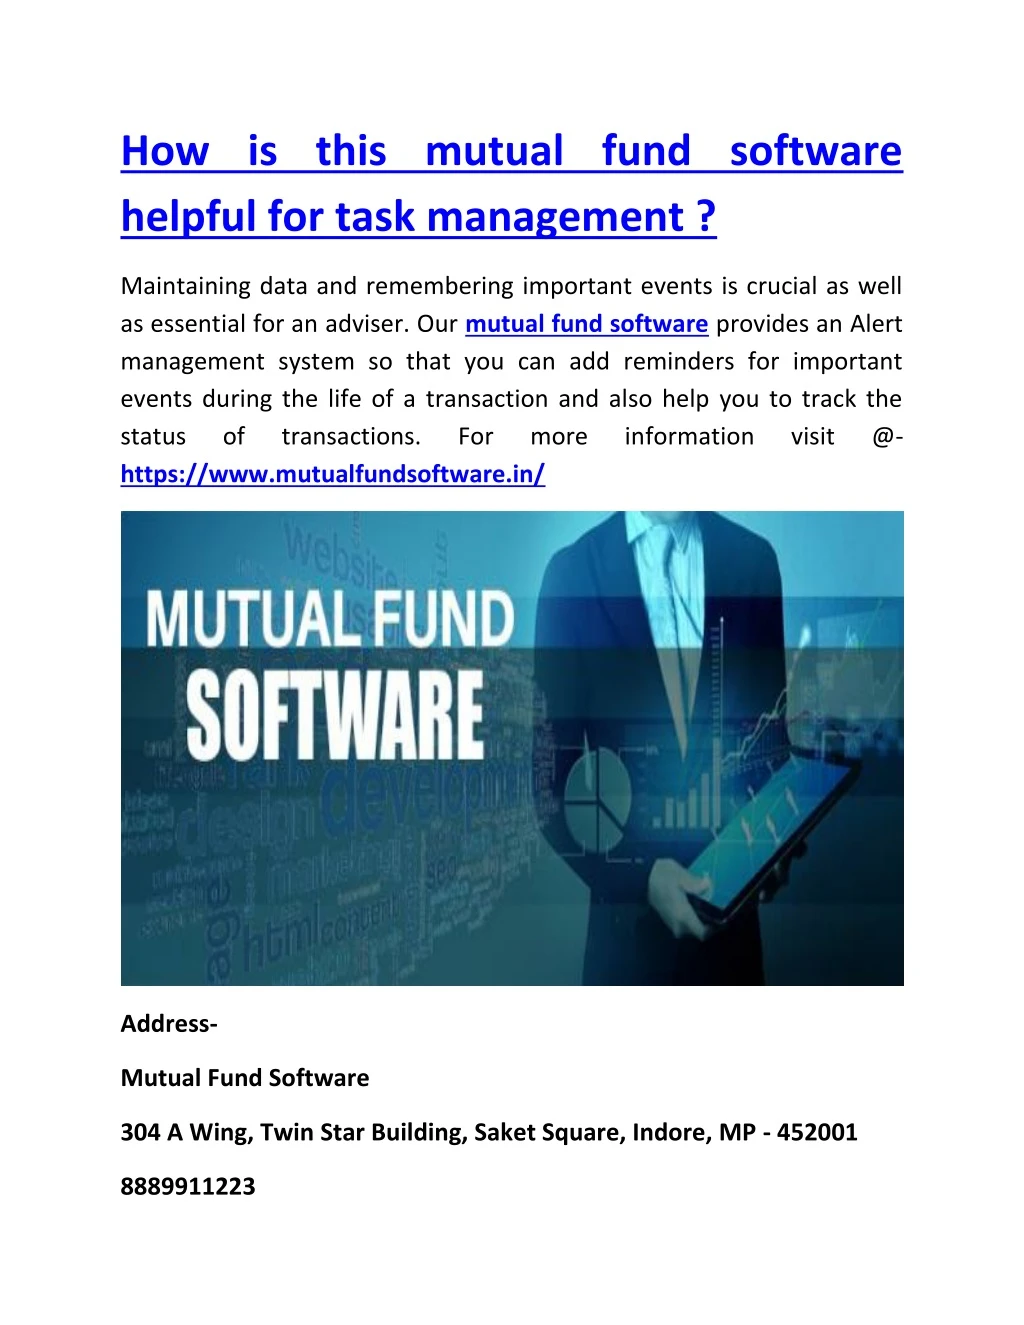 how is this mutual fund software helpful for task